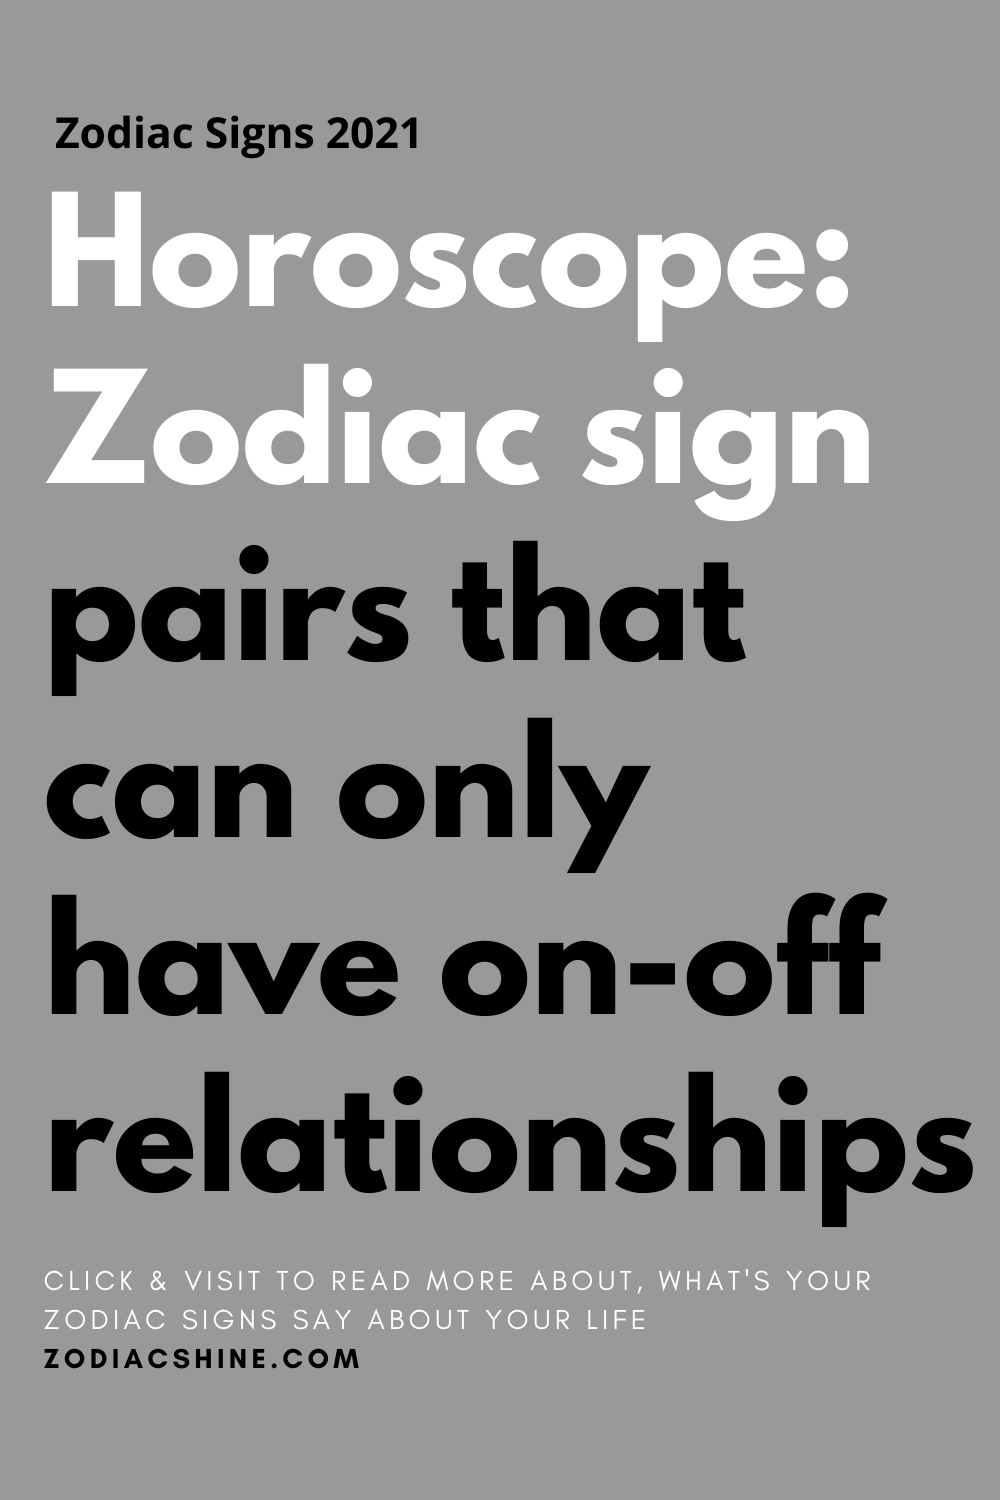 Horoscope Zodiac sign pairs that can only have on off relationships